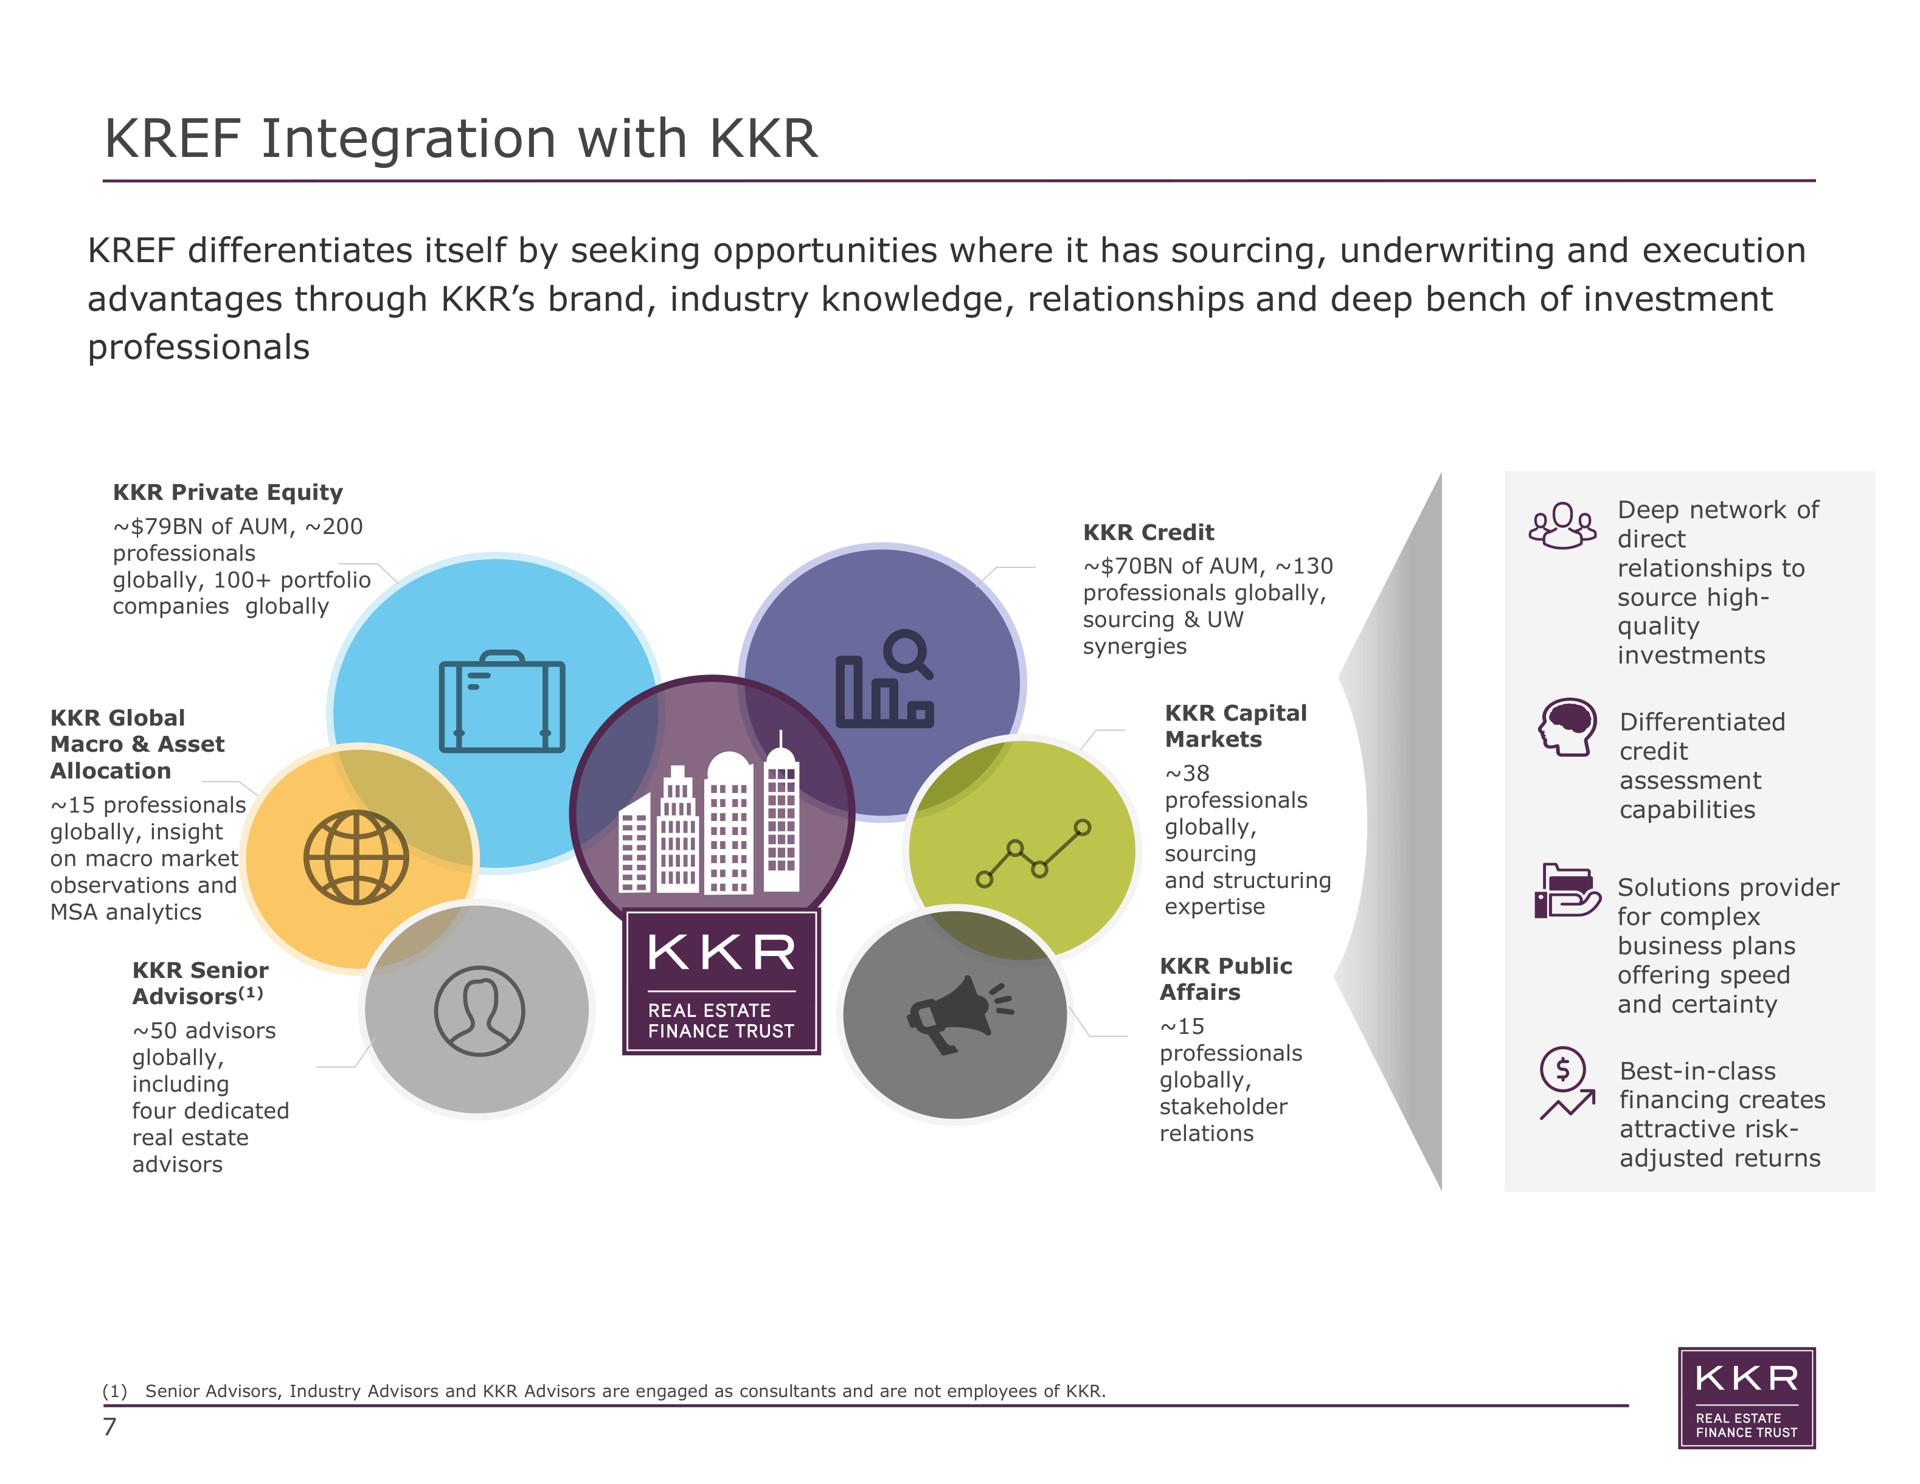 integration with differentiates itself by seeking opportunities where it has sourcing underwriting and execution advantages through brand industry knowledge relationships and deep bench of investment professionals teats a global credit synergies capital investments differentiated | KKR Real Estate Finance Trust